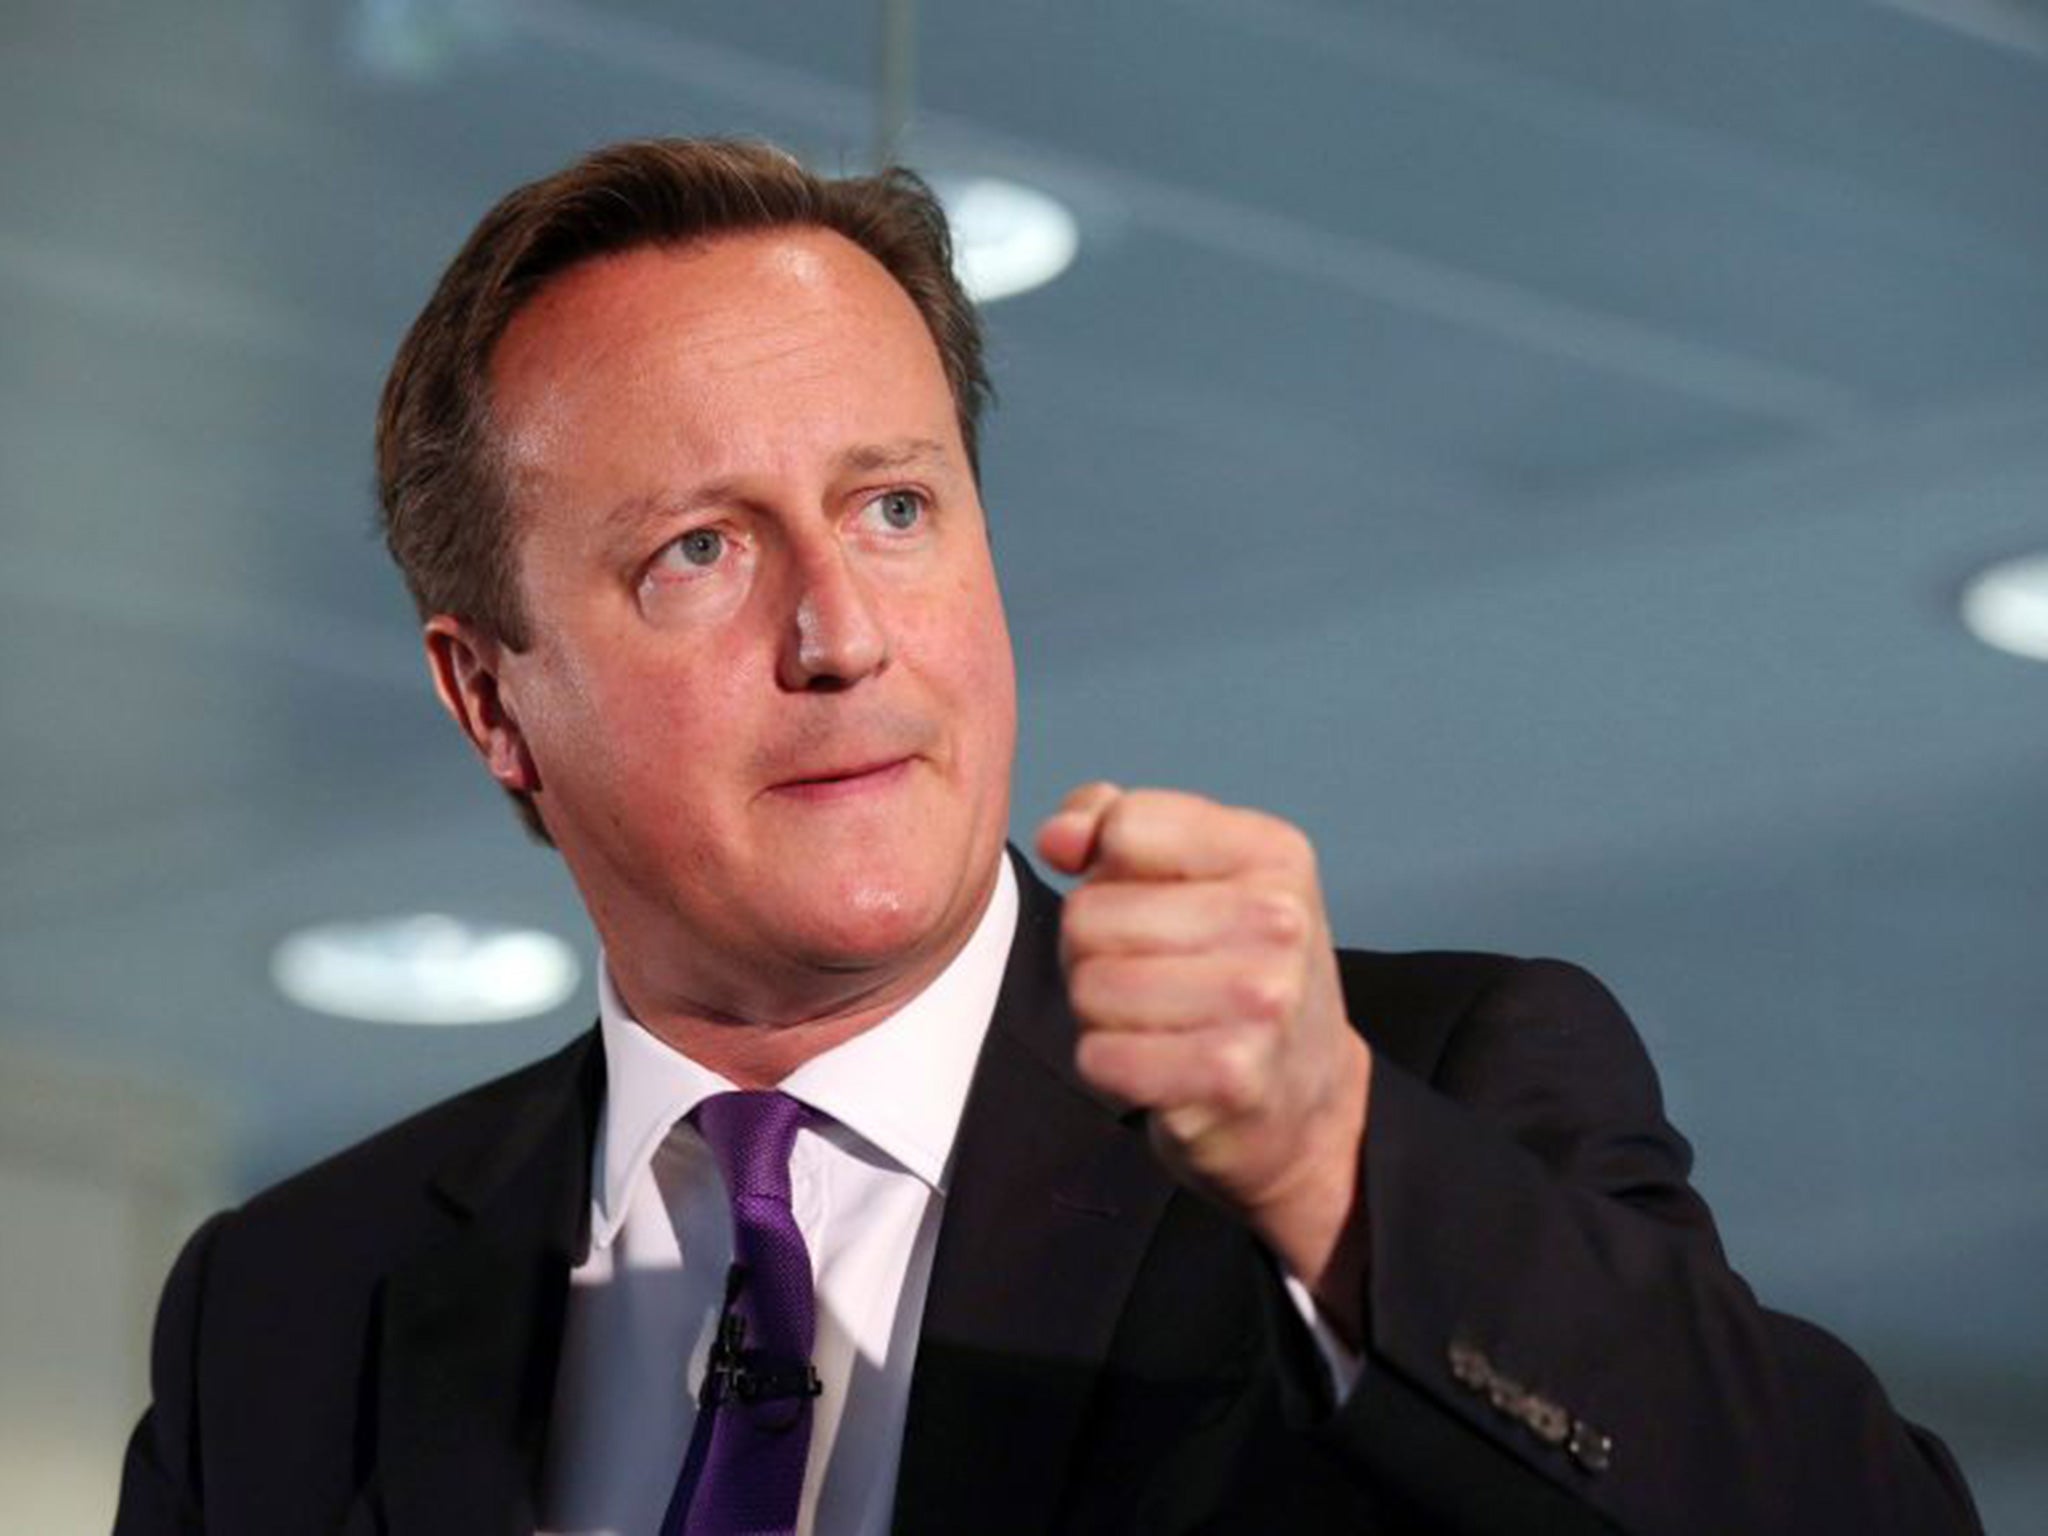 David Cameron said that all Britons should have 'loyalty' to their country in his New Year's message